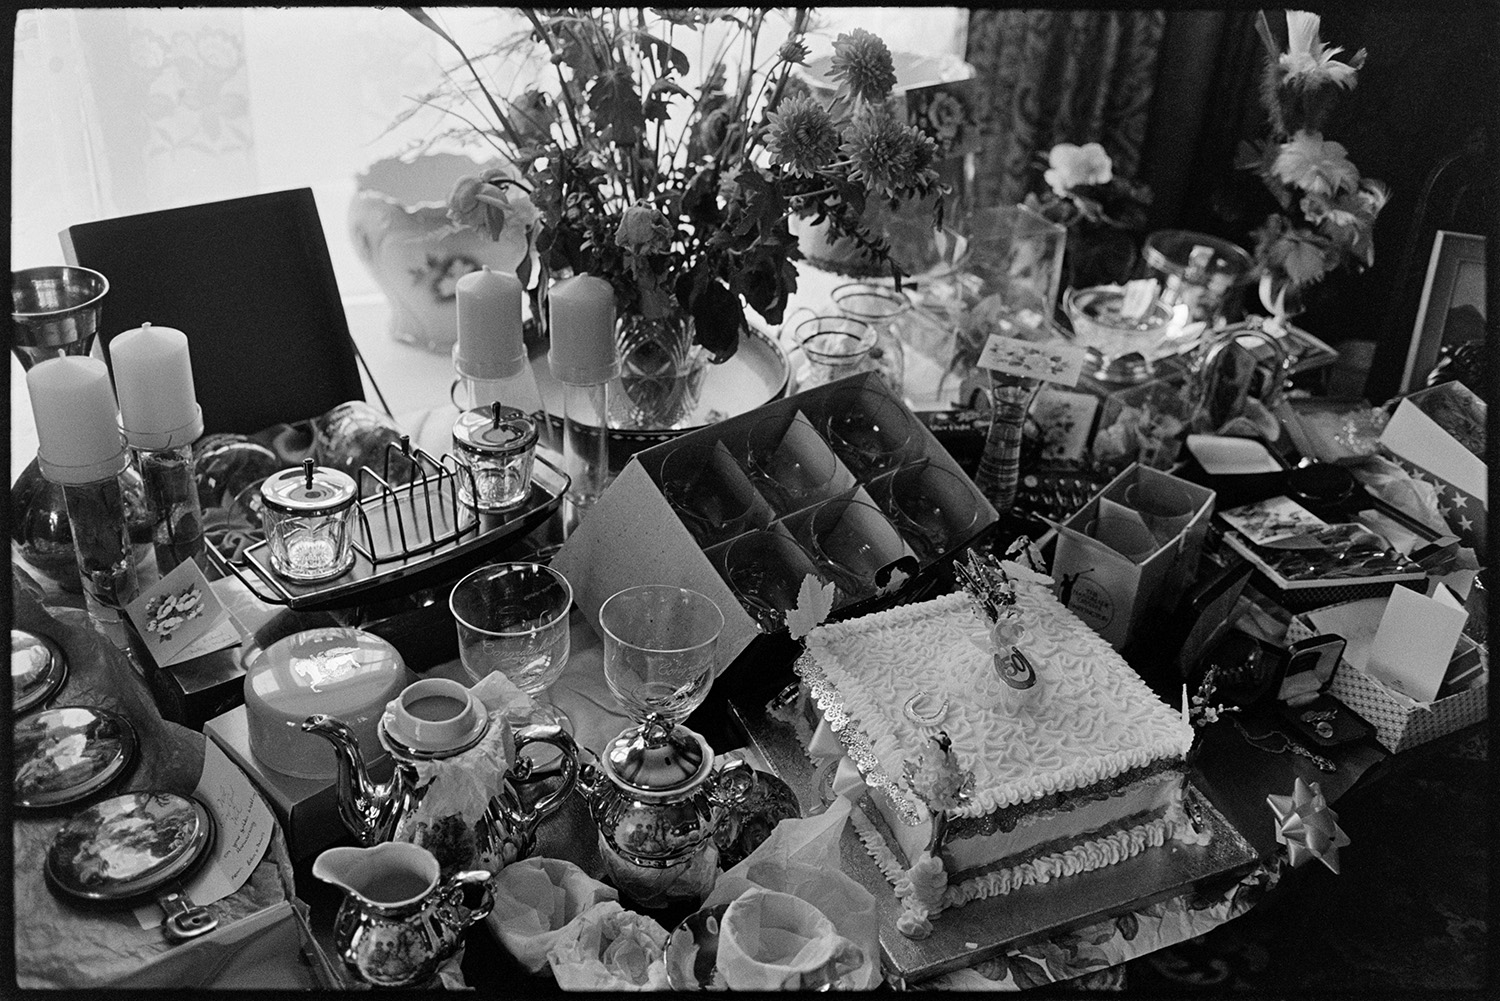 Golden Wedding Anniversary presents, cake and flowers. 
[Presents given to Mr and Mrs Hutchins for their Golden Wedding anniversary, displayed in their home at Fore Street, Dolton. Gifts includes teapots , glassware and candles. A cake is in the middle of the presents.]